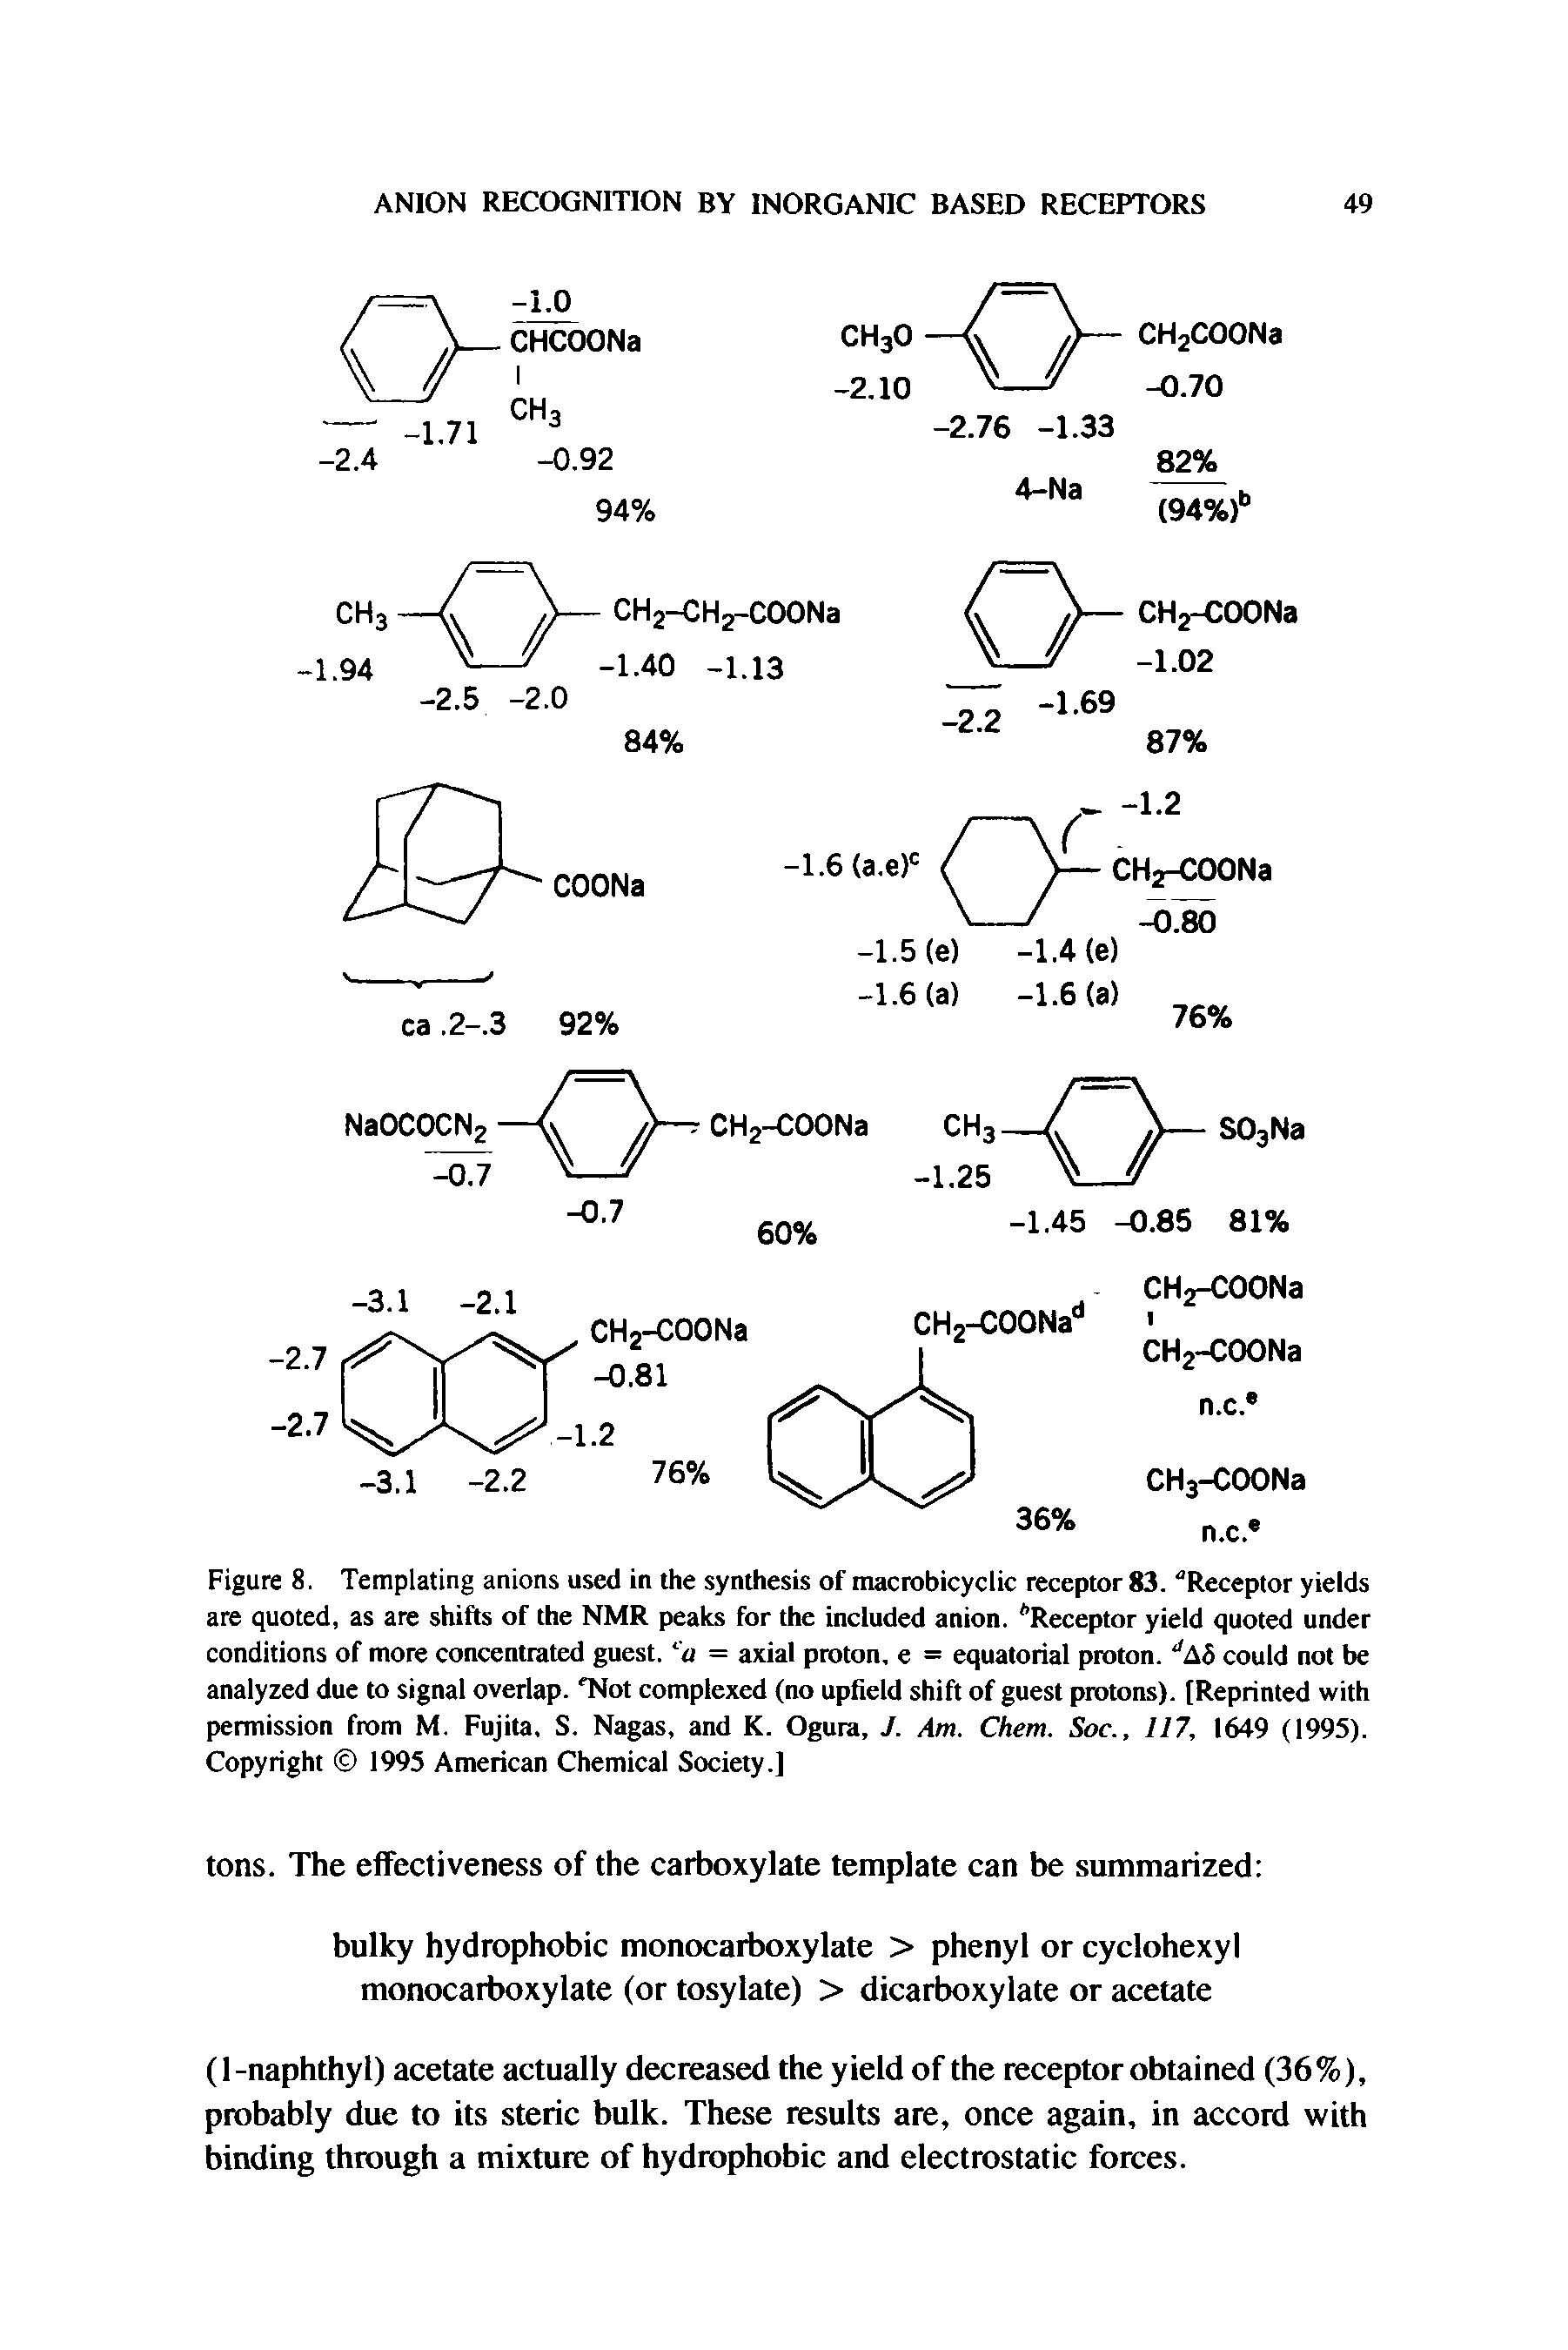 Figure 8. Templating anions used in the synthesis of macrobicyclic receptor 83. Receptor yields are quoted, as are shifts of the NMR peaks for the included anion. Receptor yield quoted under conditions of more concentrated guest. ea = axial proton, e = equatorial proton. AS could not be analyzed due to signal overlap. Not complexed (no upheld shift of guest protons). [Reprinted with permission from M. Fujita, S. Nagas, and K. Ogura, J. Am. Chem. Soc., 117, 1649 (1995). Copyright 1995 American Chemical Society.]...